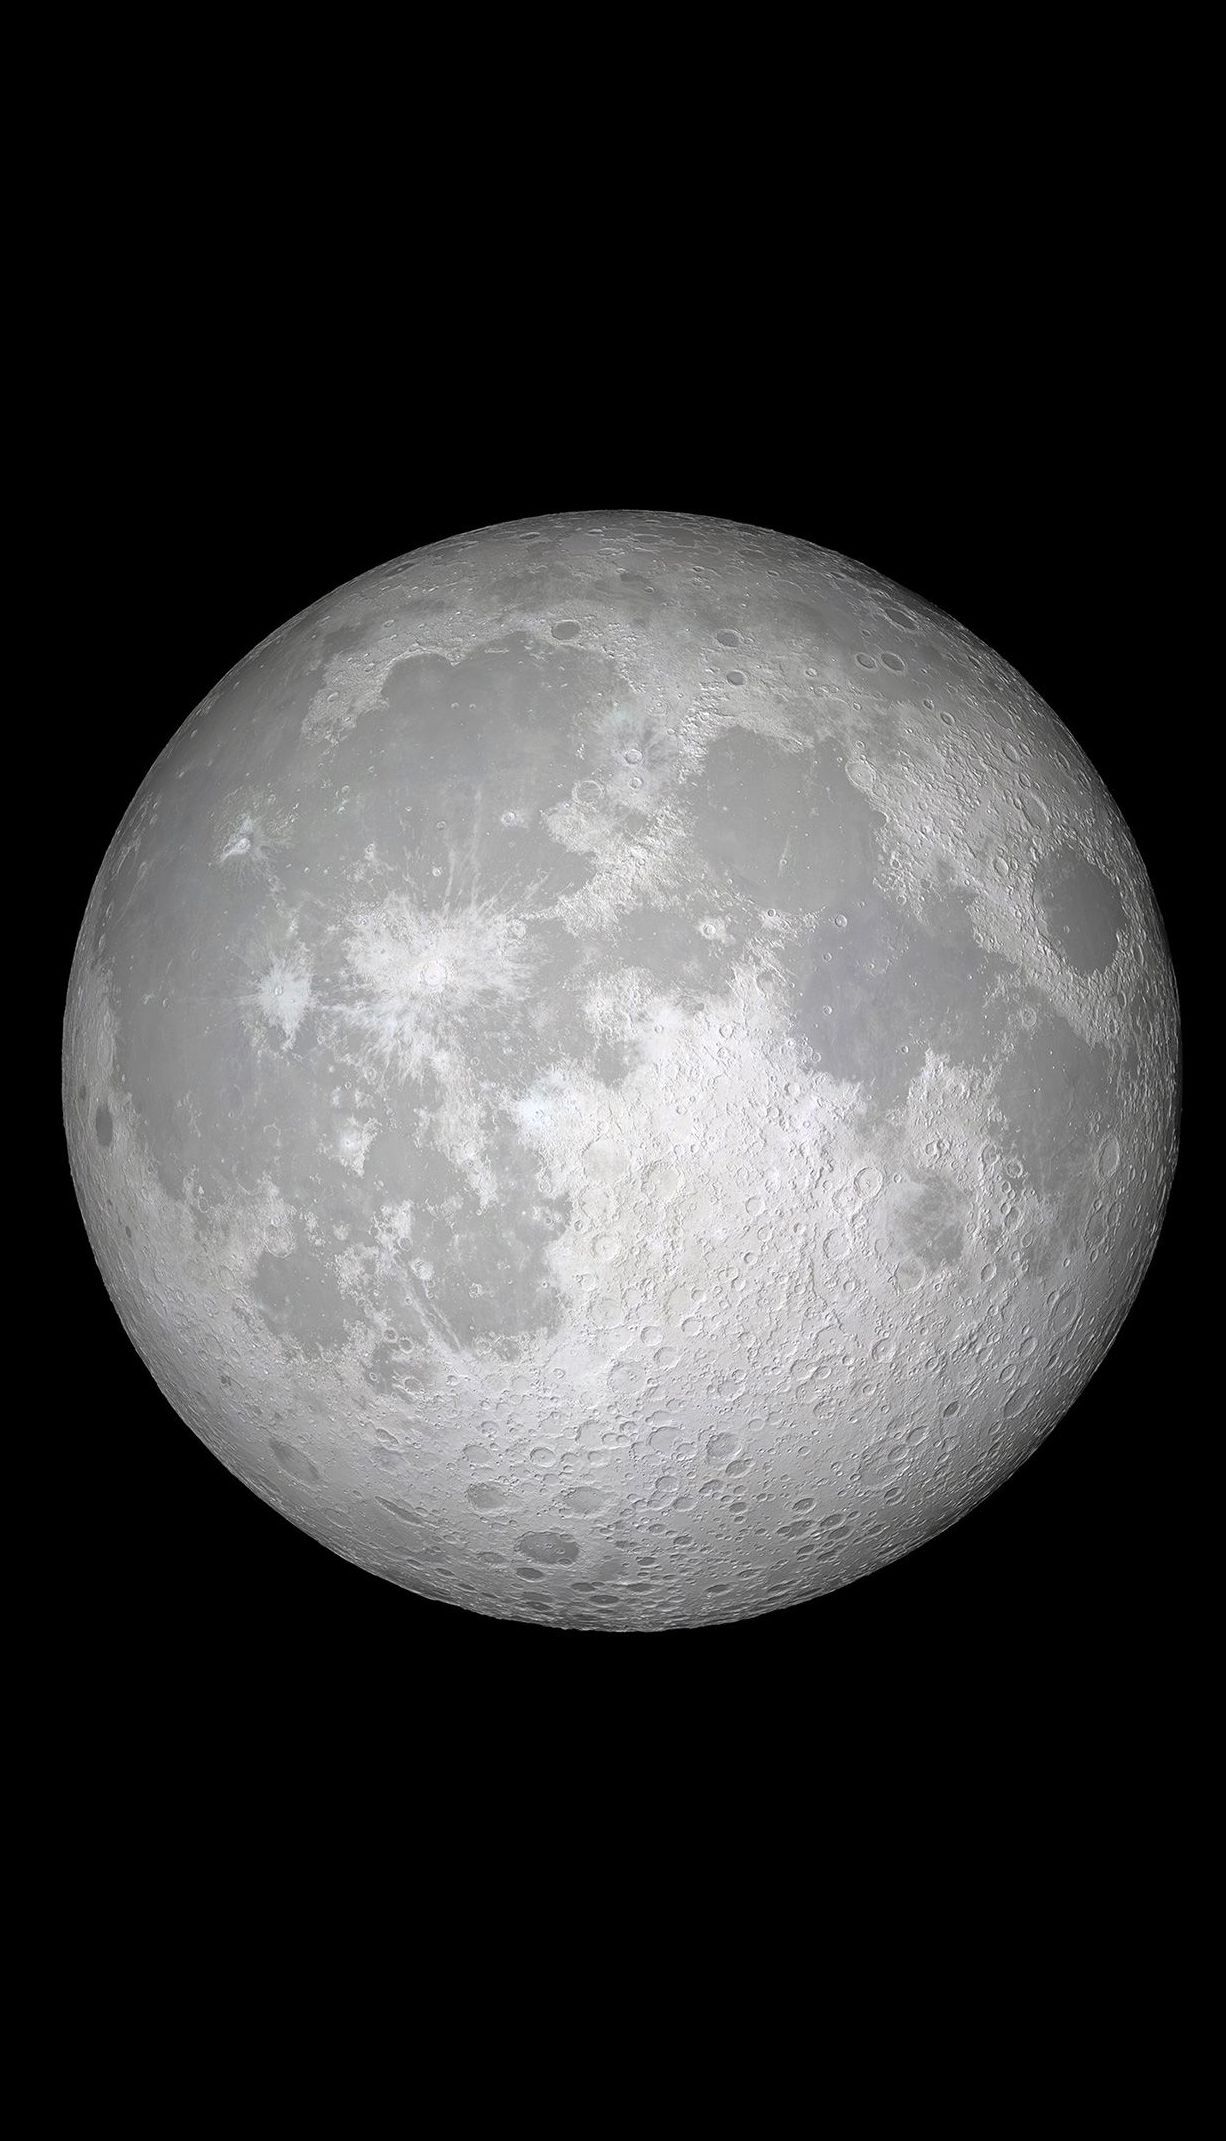 What's Moon Actually Look Like